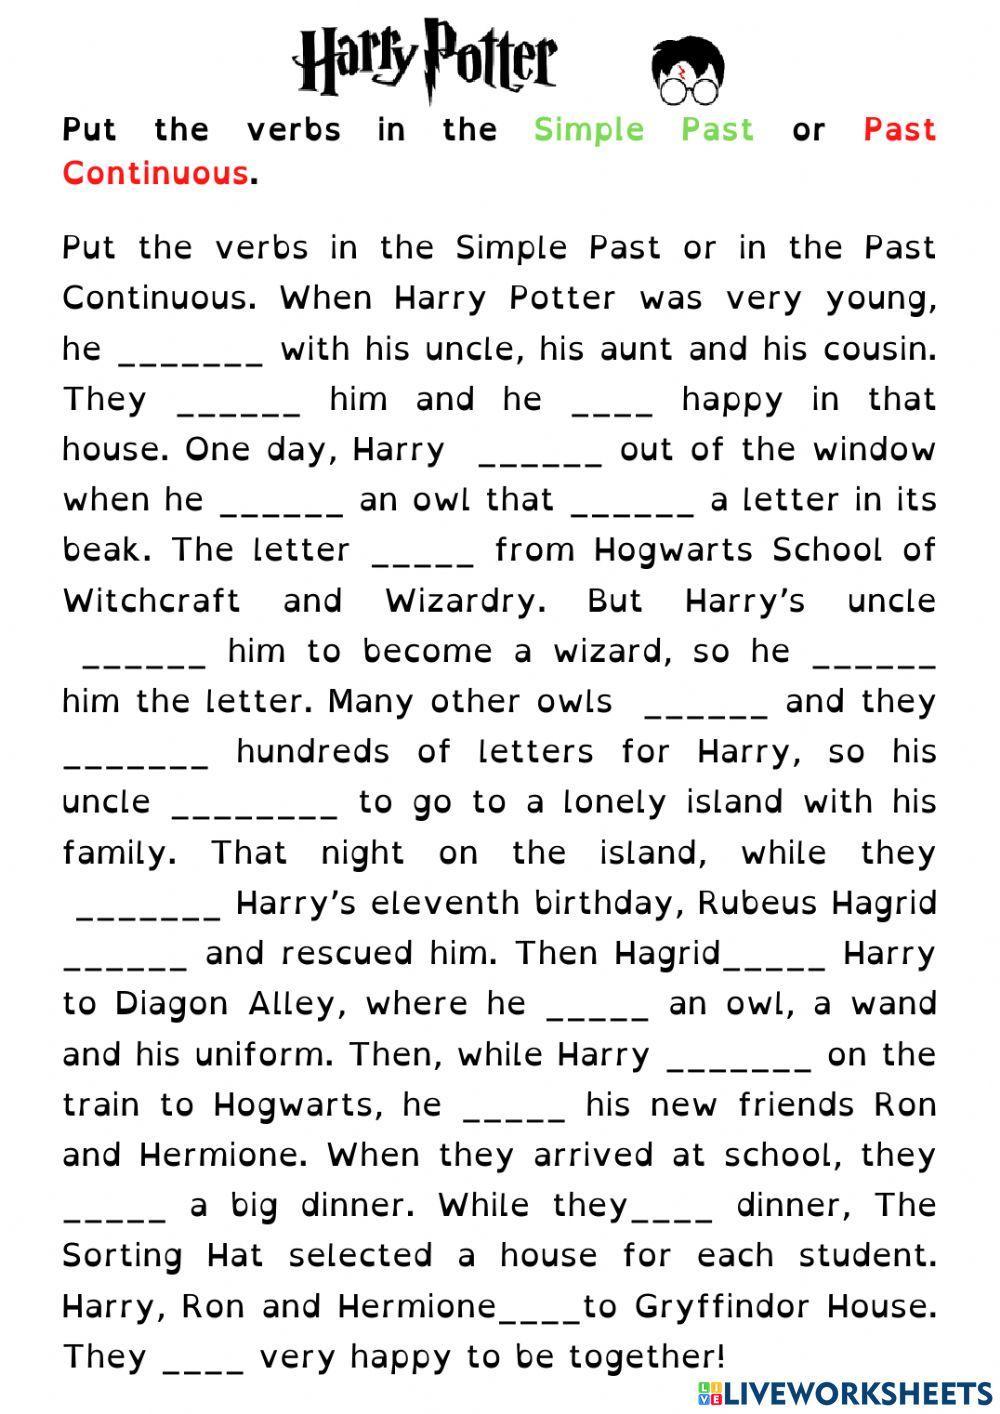 Harry potter past simple and continuous